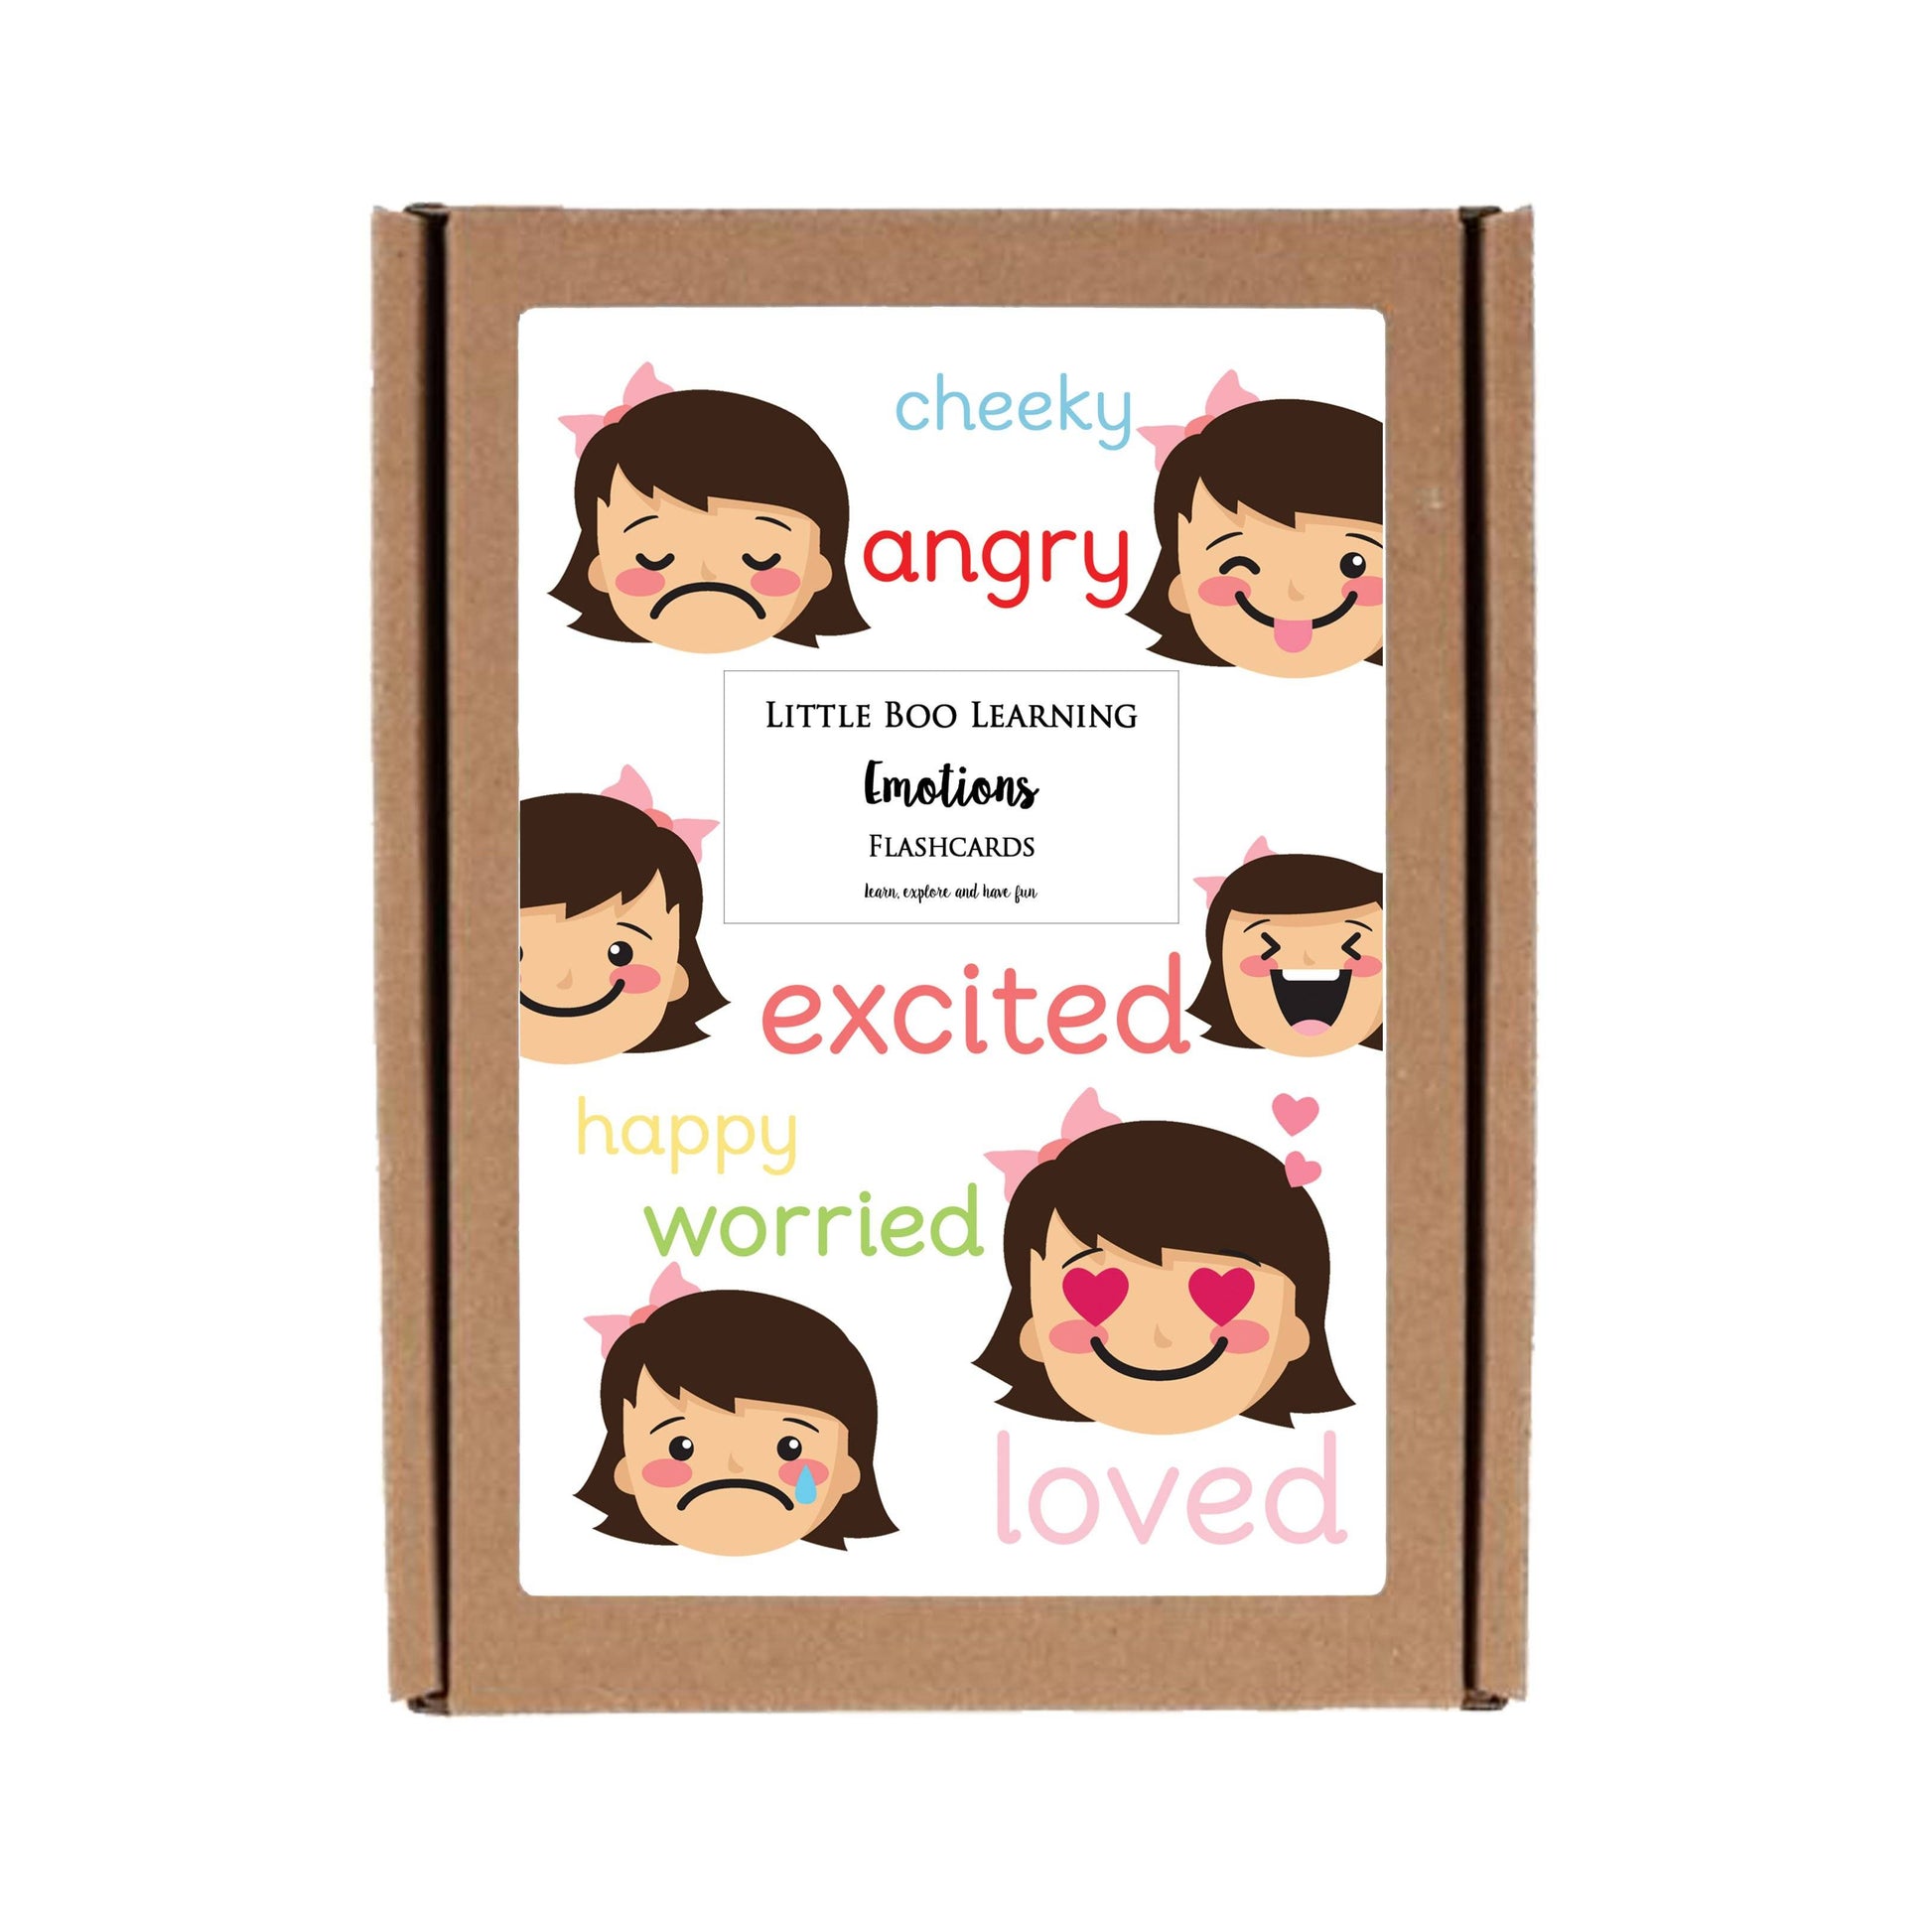 Girl Emotions Flashcards-Little Boo Learning-emotions,feelings,Flashcards